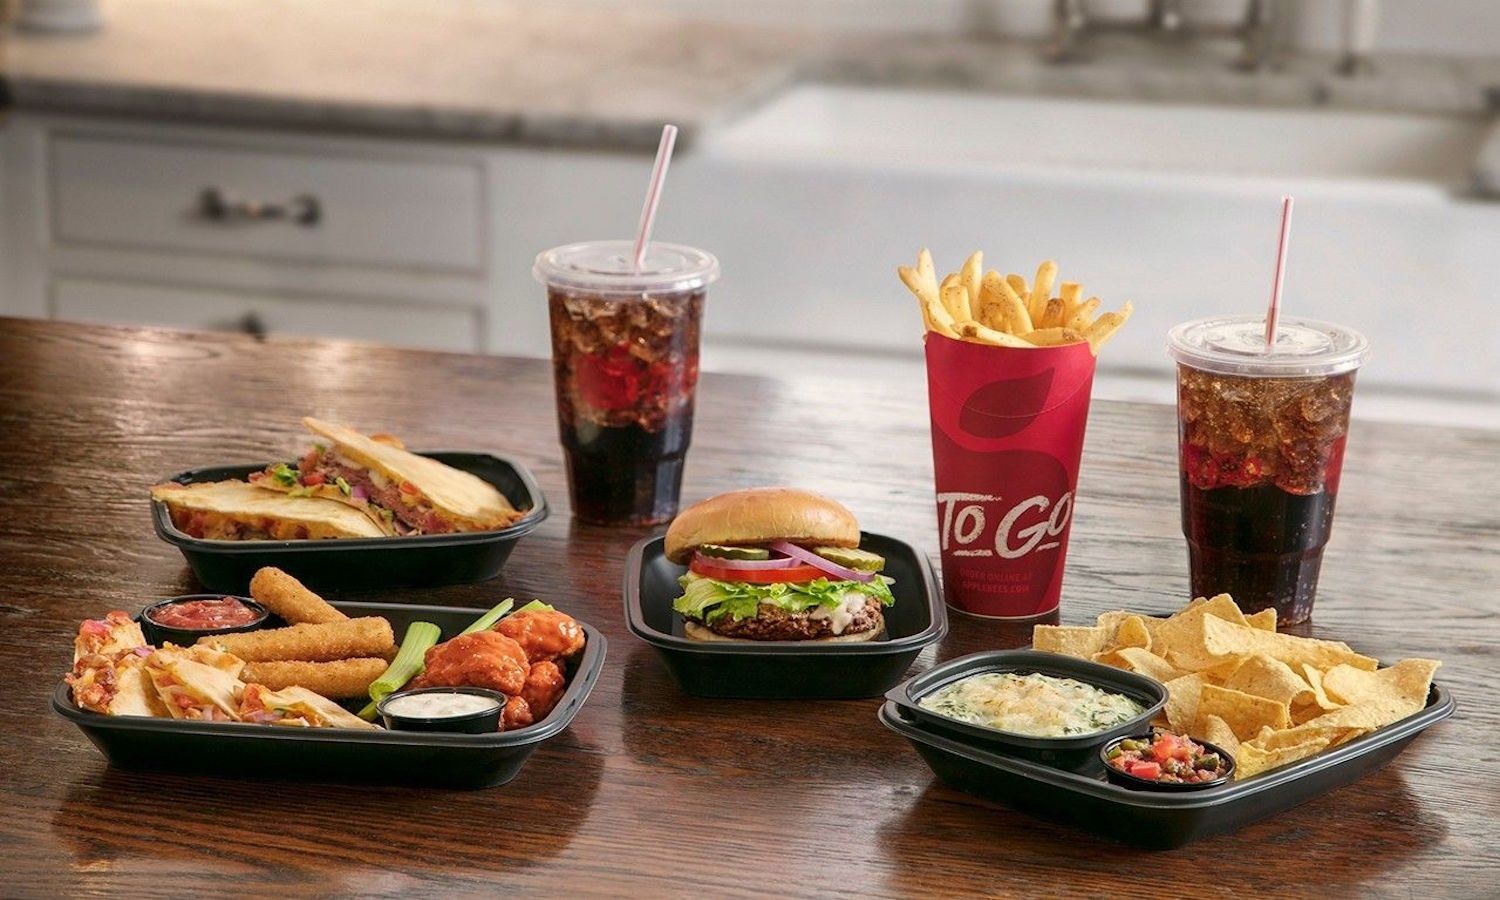 Applebee’s Takeout Near You in Concord